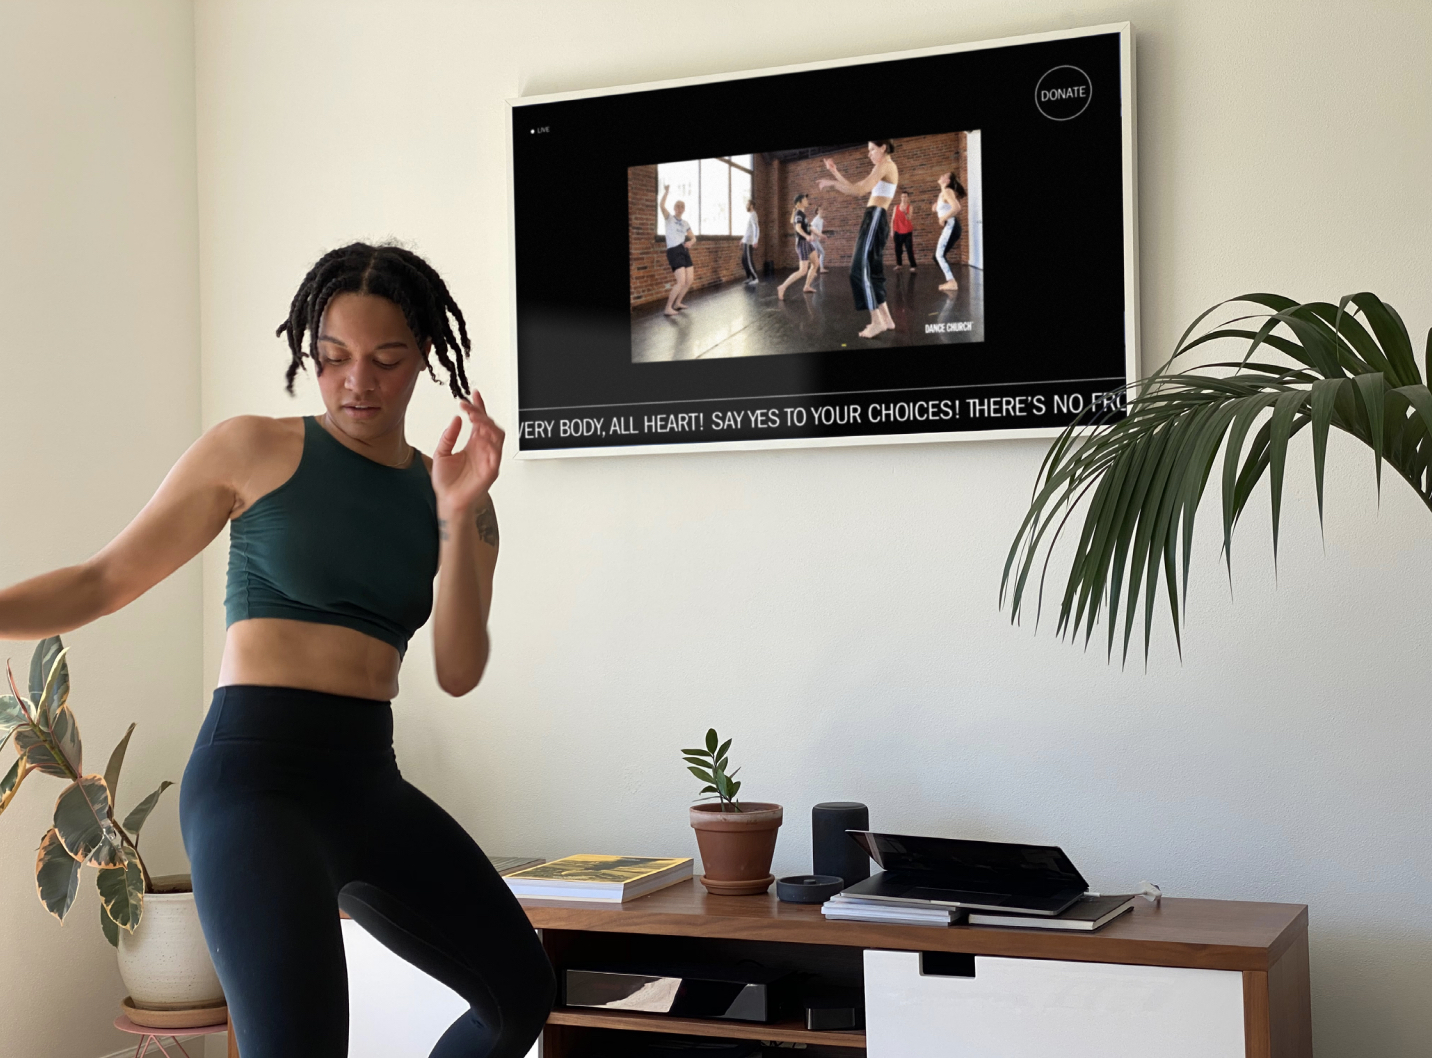 A woman dancing in her living room during a livestream